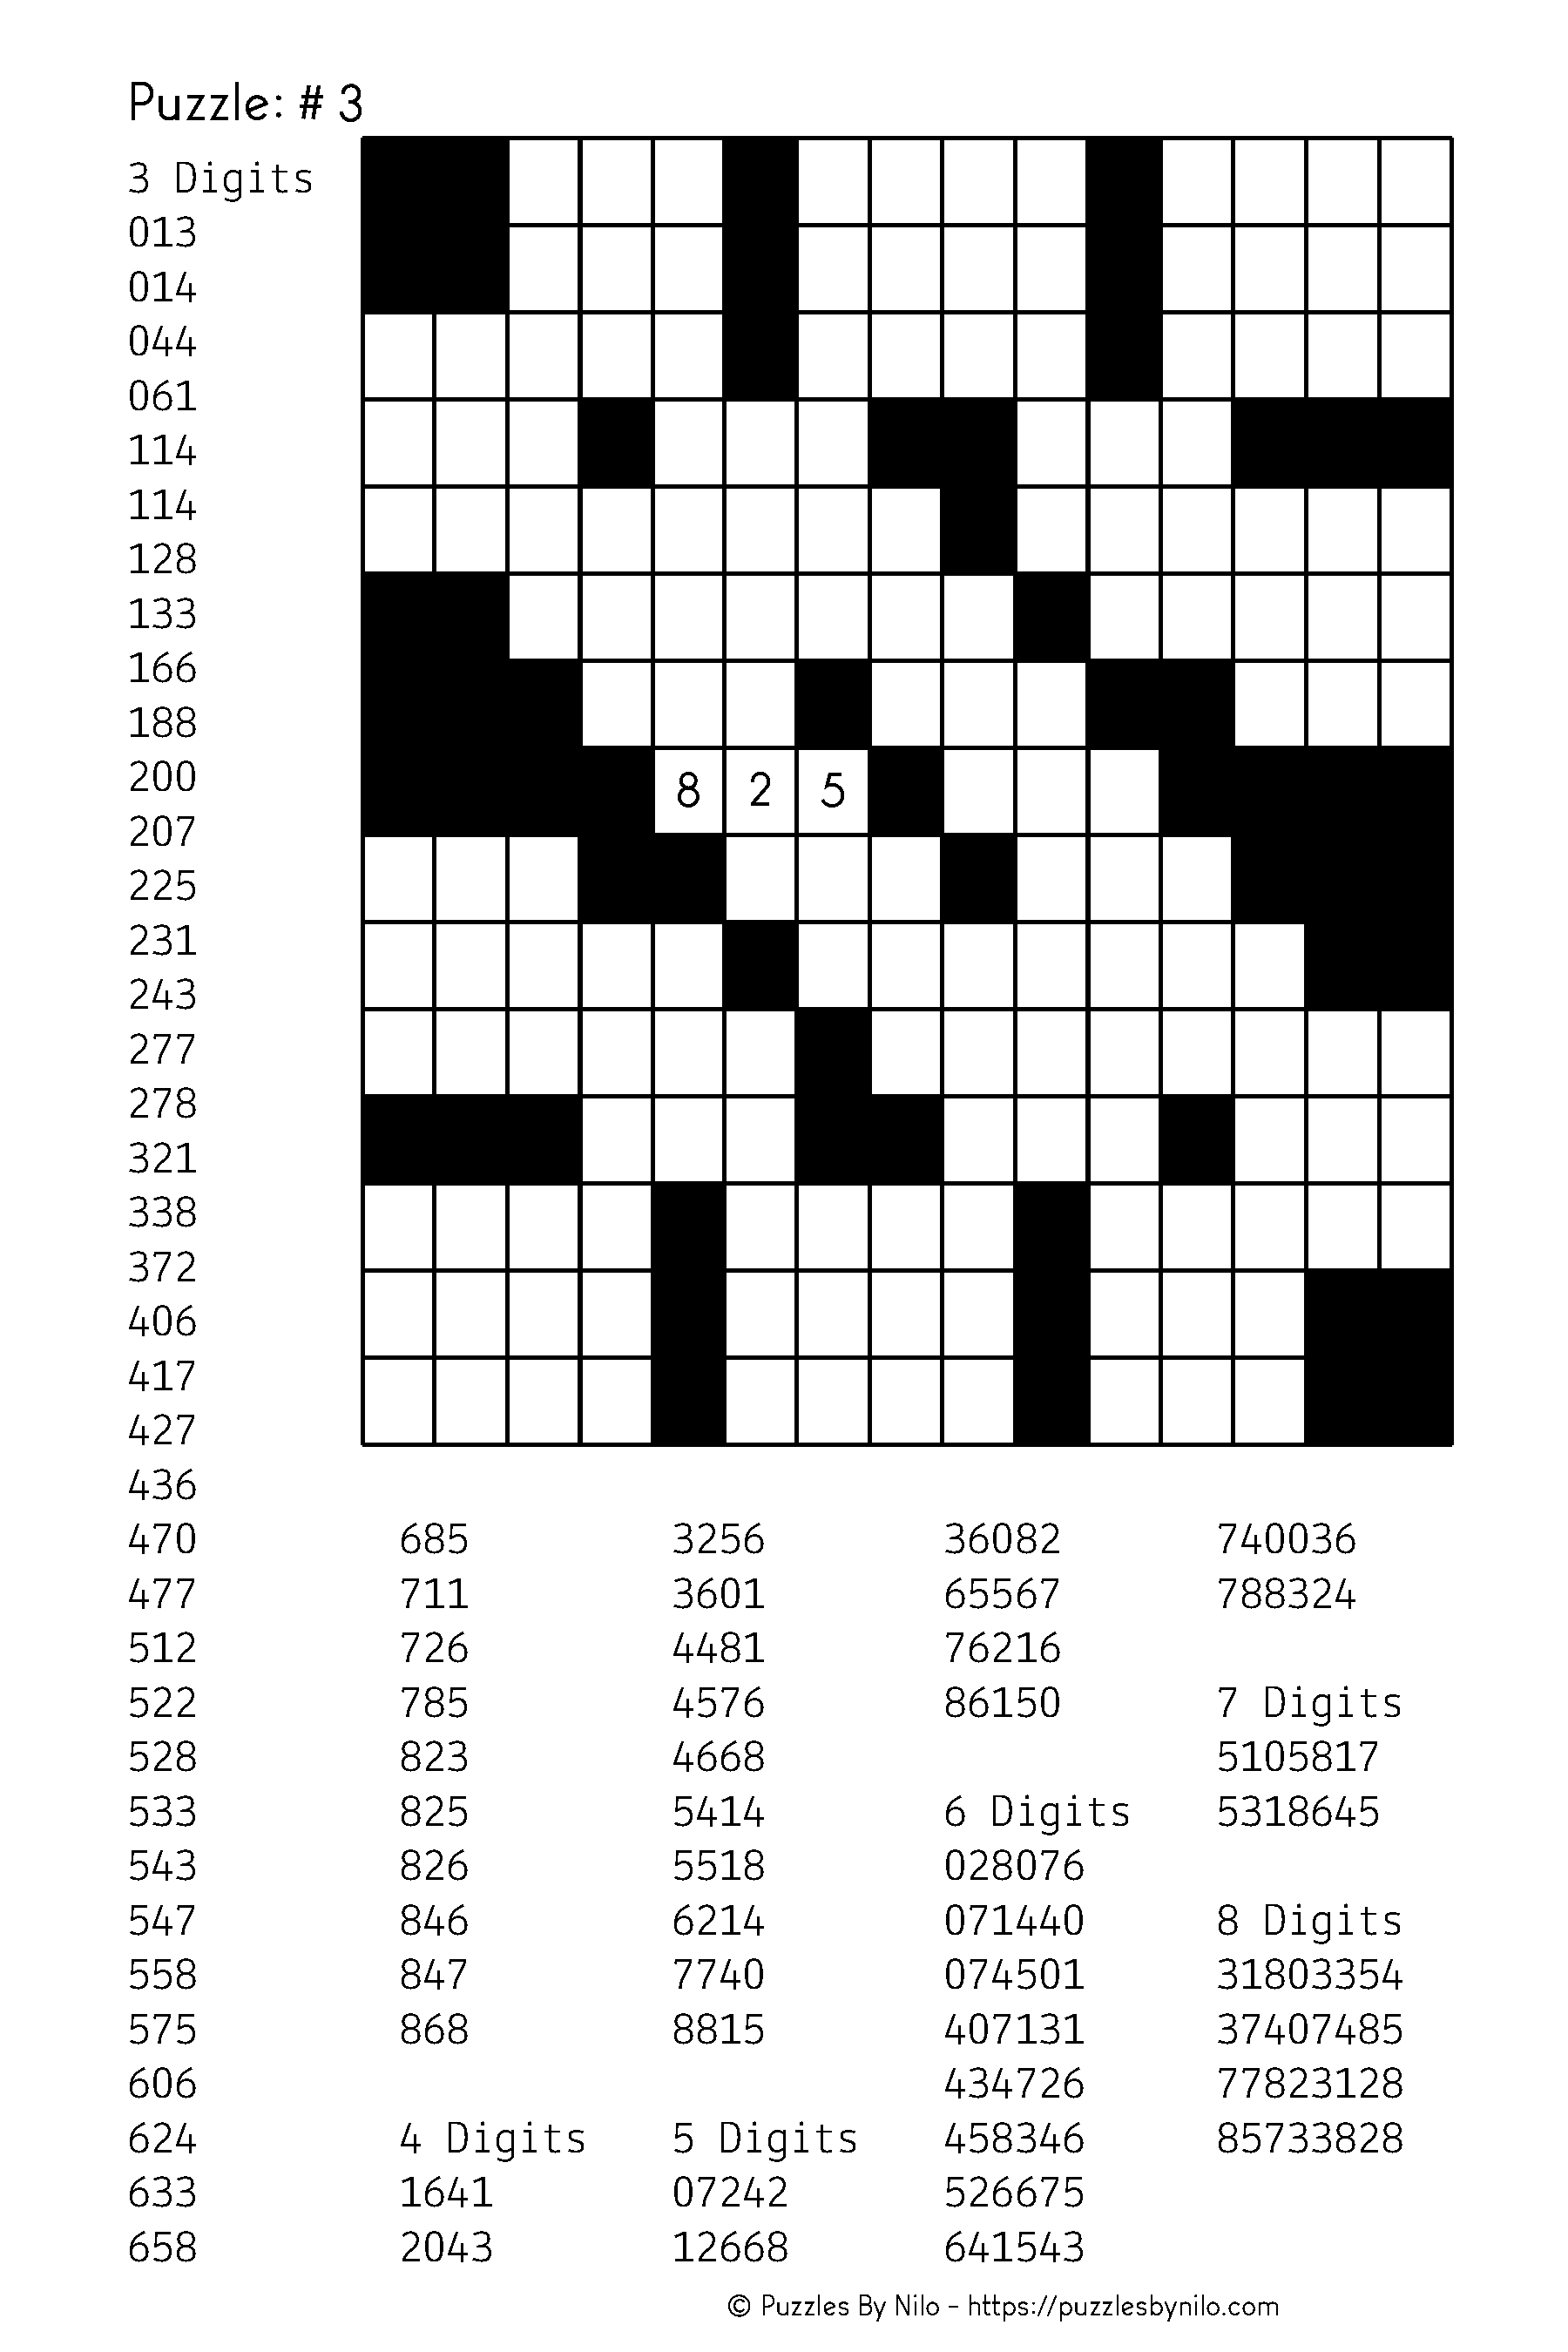 Get Your Free Puzzle Here! - Https://goo.gl/hxpjtw | Math Ideas - Free Printable Fill In Crossword Puzzles